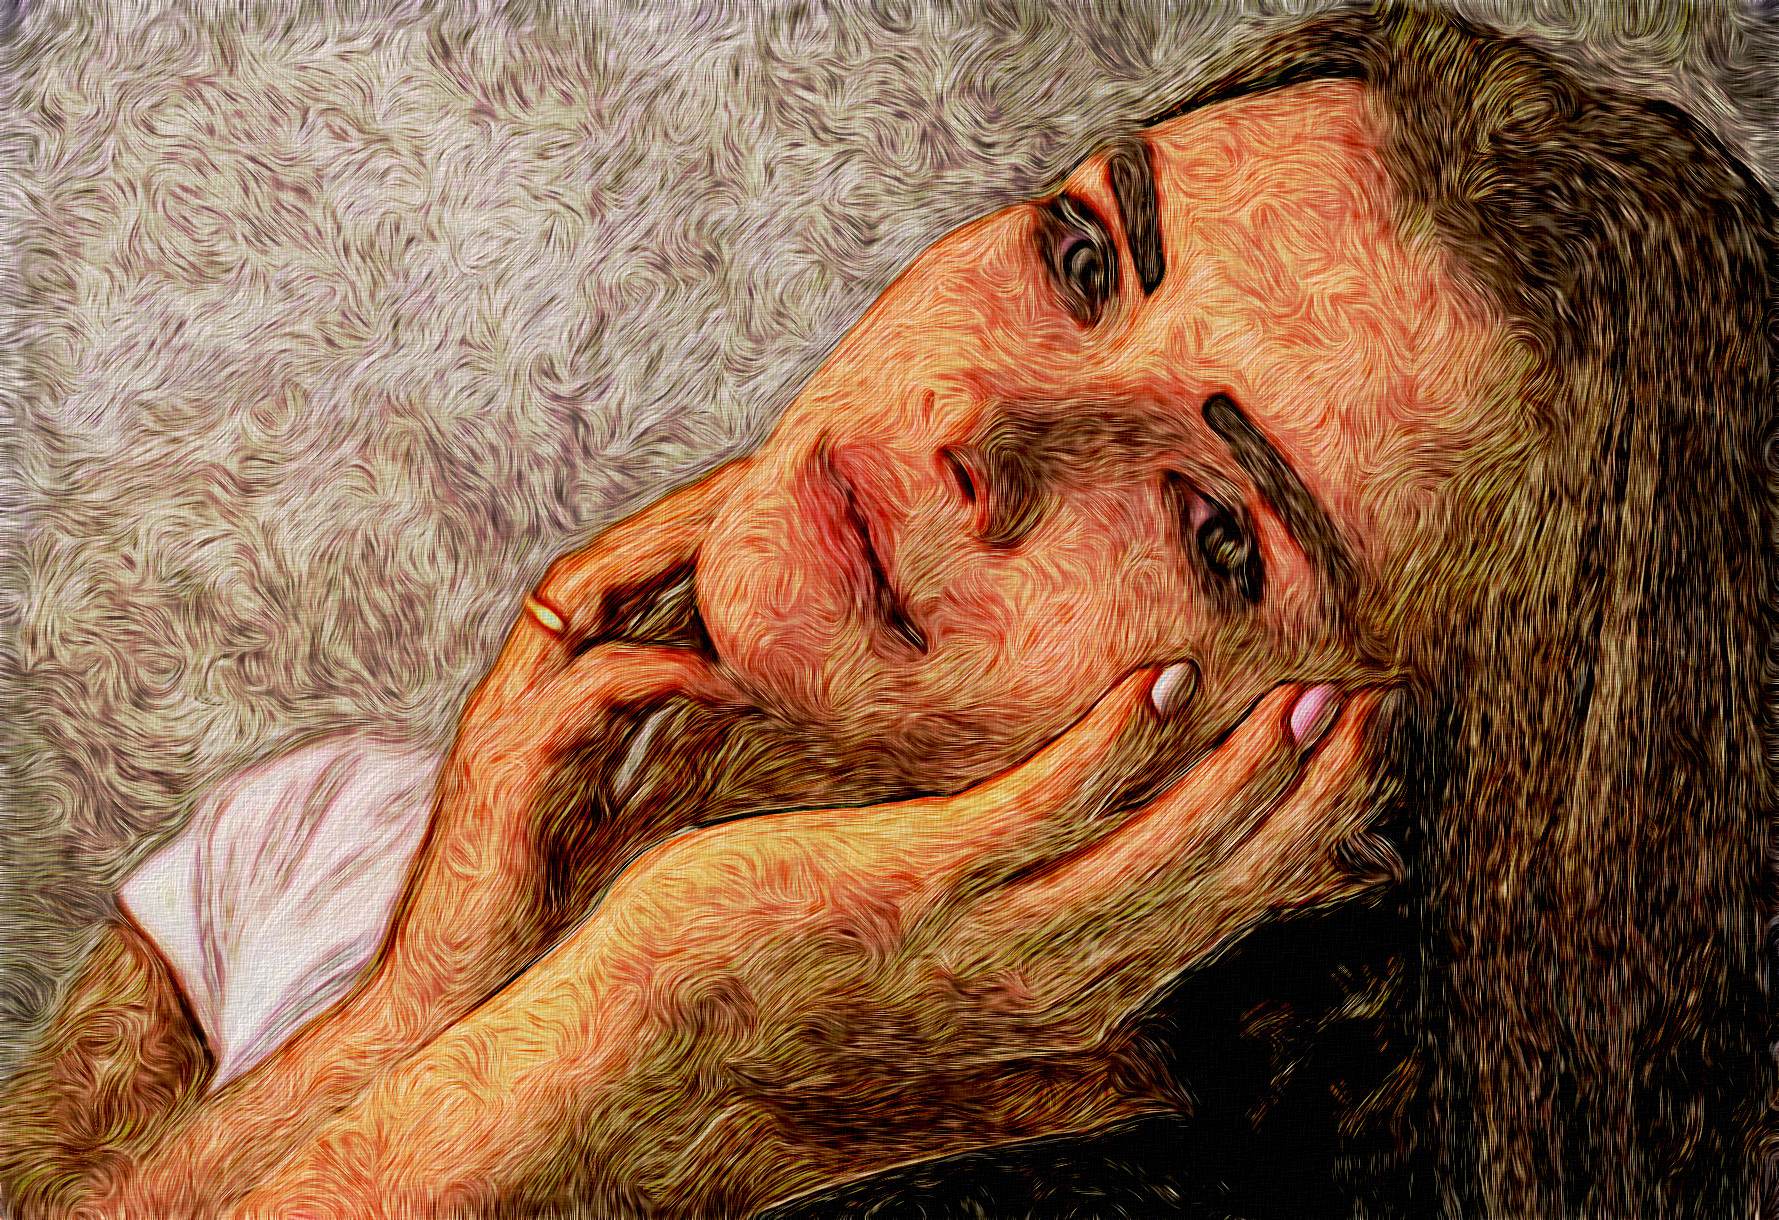 2021-09-29 17-34-41 girl-2771001_1920 with JVID effect R (Fake Impasto Paint Effect), parms =0, 3, 3, 3, 0, 0.025.jpg